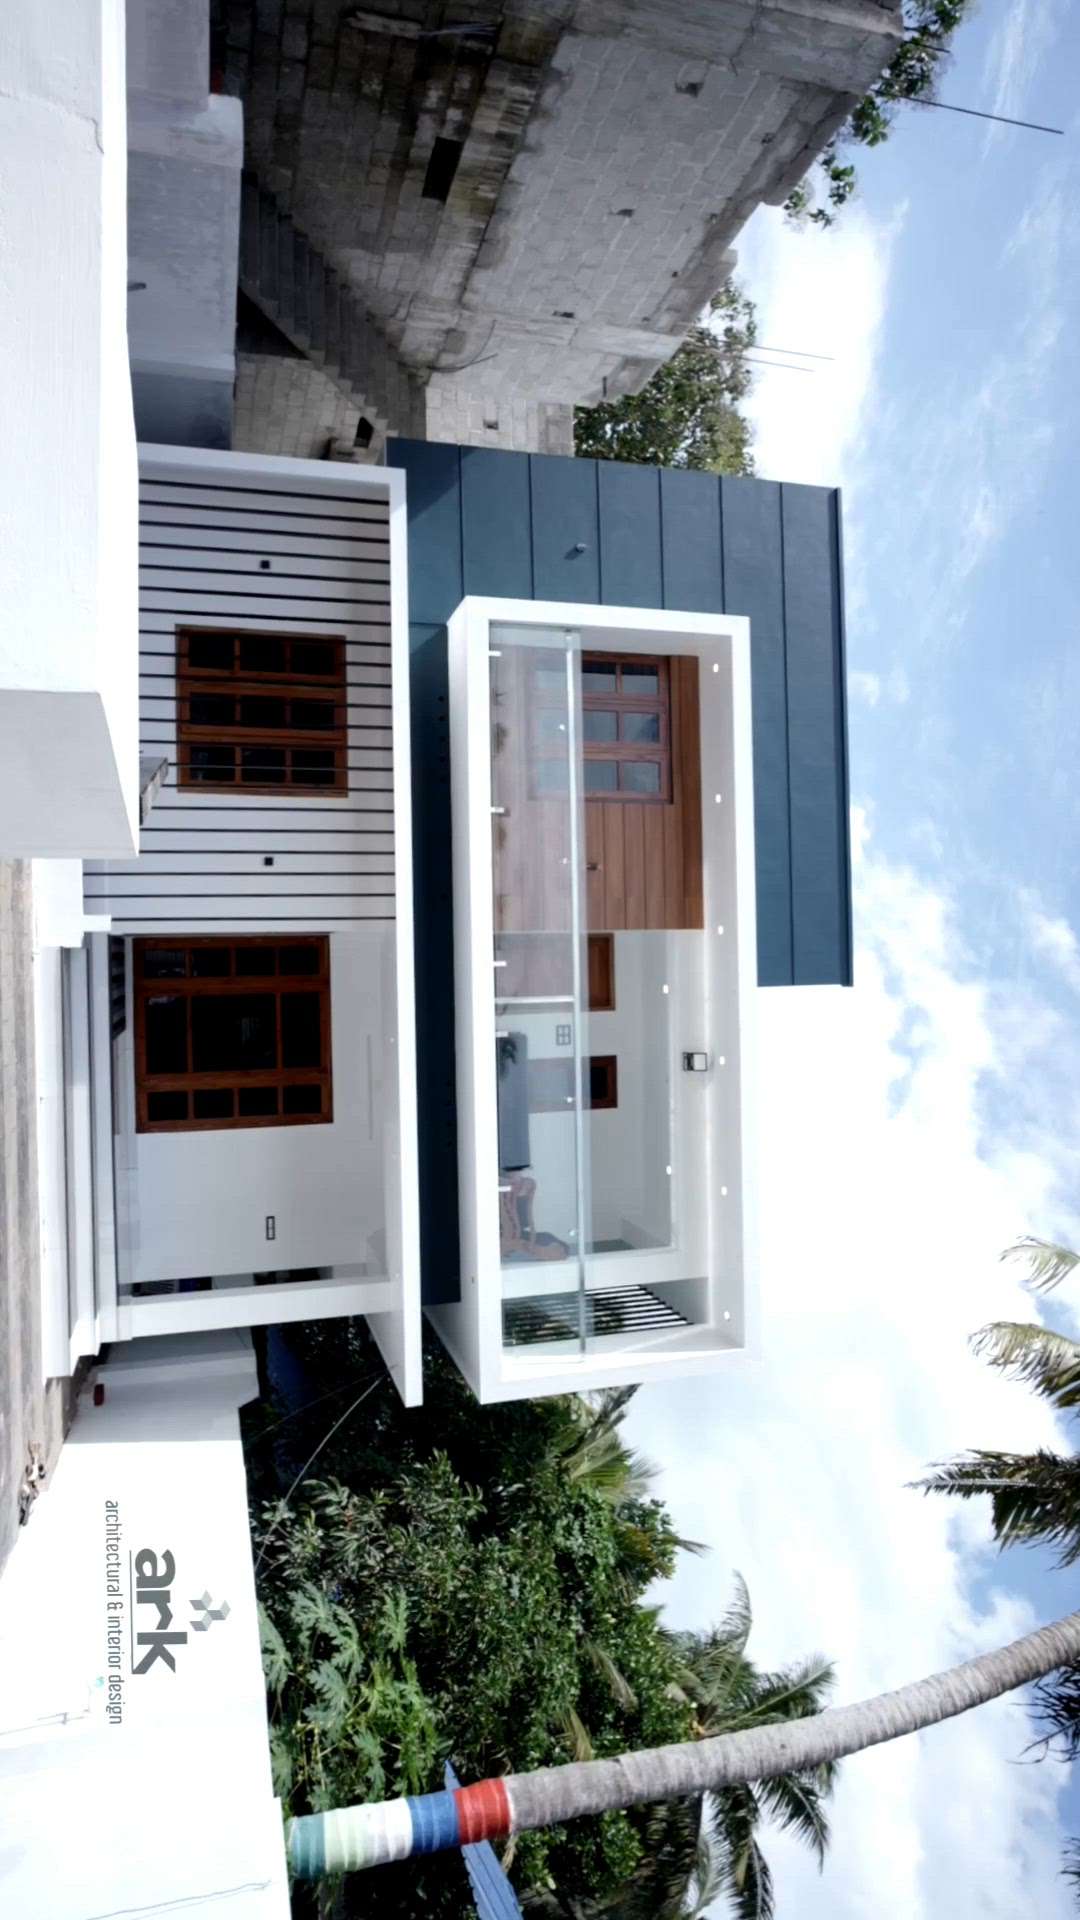 Completed Project    Location : Poovar Trivandrum    Client : Sunil #contruction #CivilContractor  #keralaengineer  #KeralaStyleHouse  #ContemporaryHouse  #ContemporaryDesigns  #Architect  #architecturedesigns  #Architectural&Interior  #civilconstruction  #budgethomes  #4bhk   #45LakhHouse